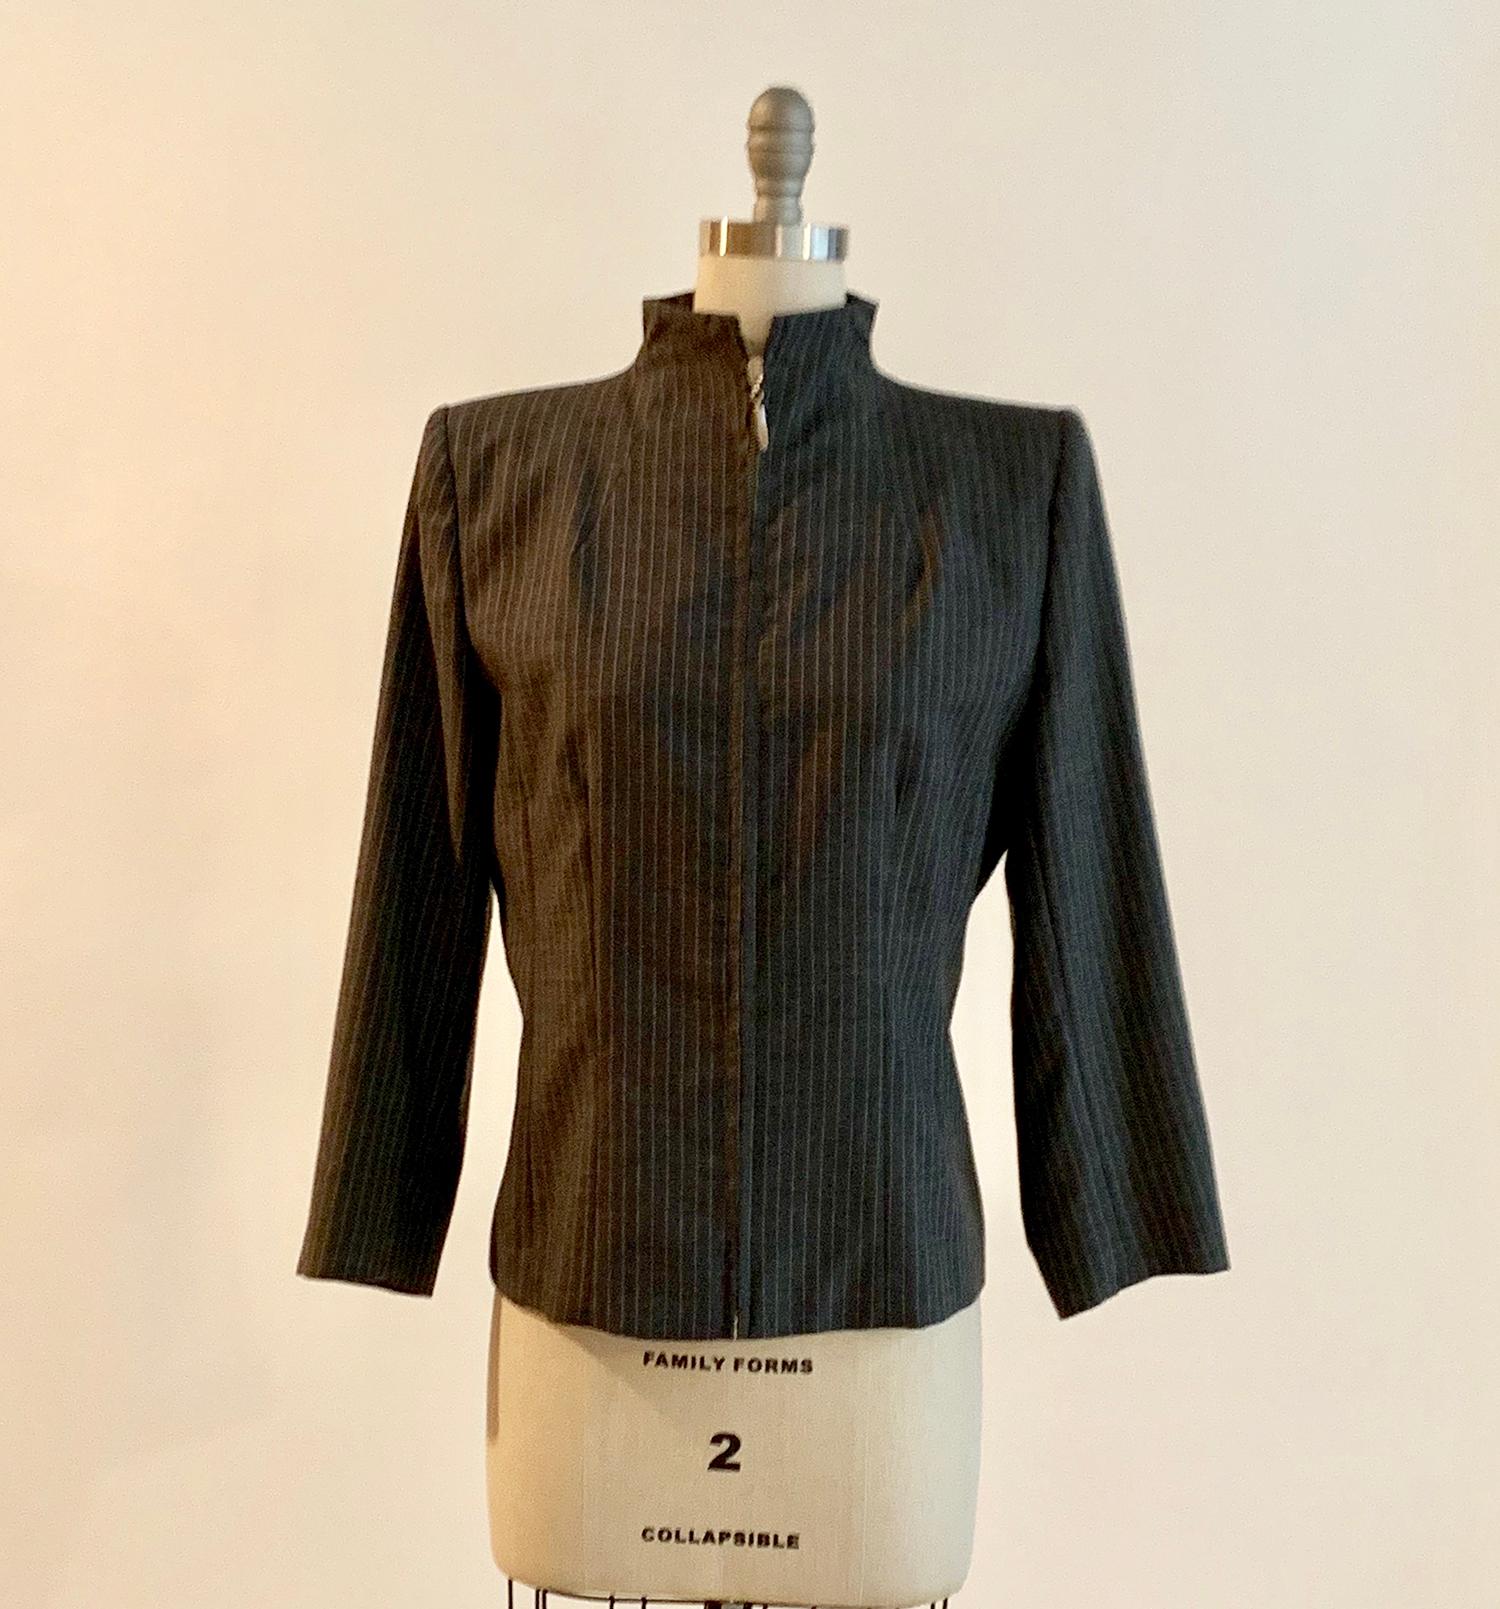 Alexander McQueen vintage 1990s grey pinstripe jacket with zip front. Iconic McQueen tailoring with mid-weight padding at shoulders and four logo buttons at each cuff. Branded 'McQueen' at zipper. (Lining and buttons indicate this piece is most